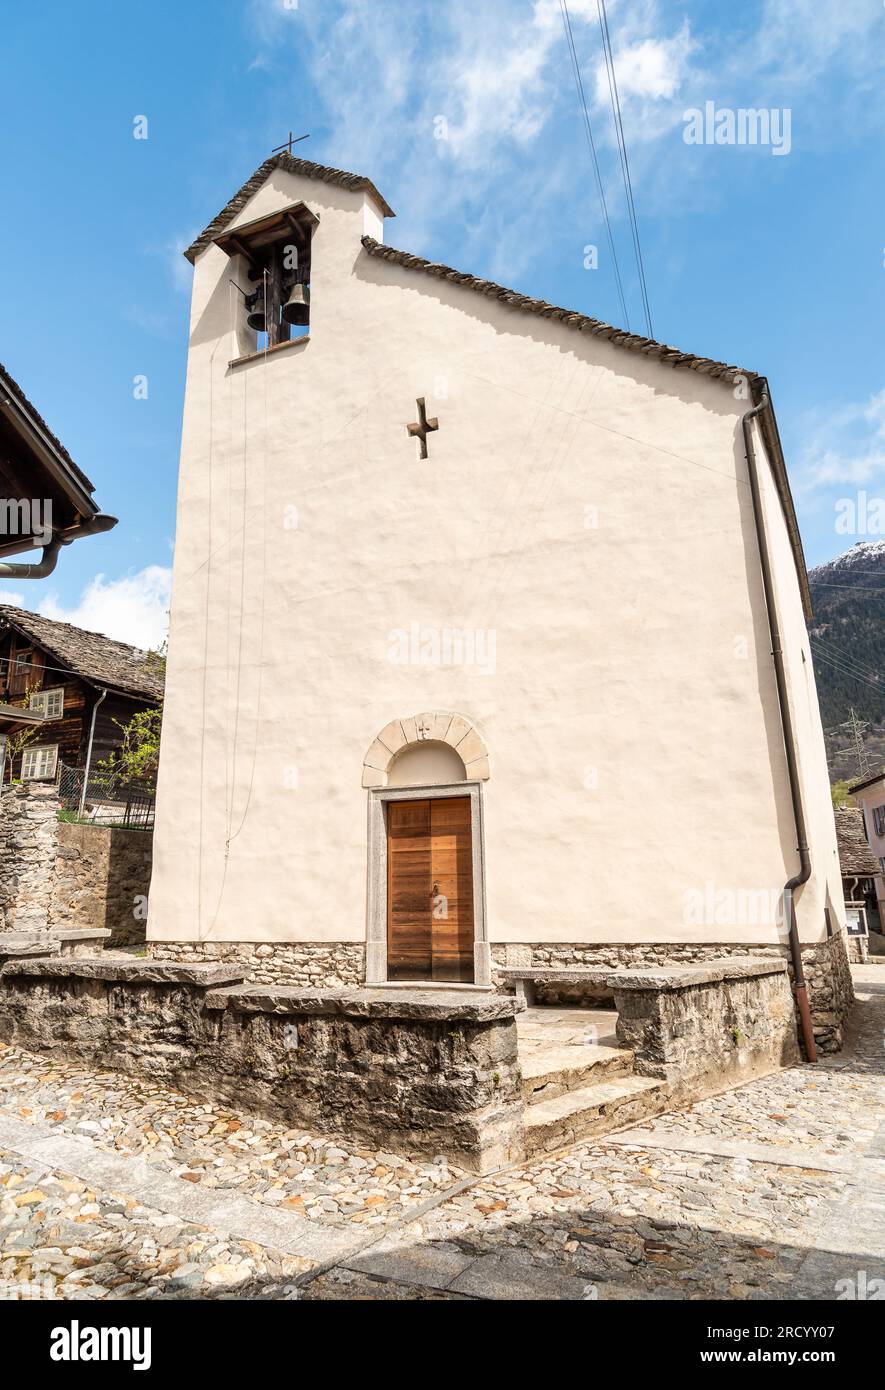 The church of Sant Ambrogio, is a Romanesque religious building in Chironico, a hamlet in the municipality of Faido, Ticino, Switzerland Stock Photo